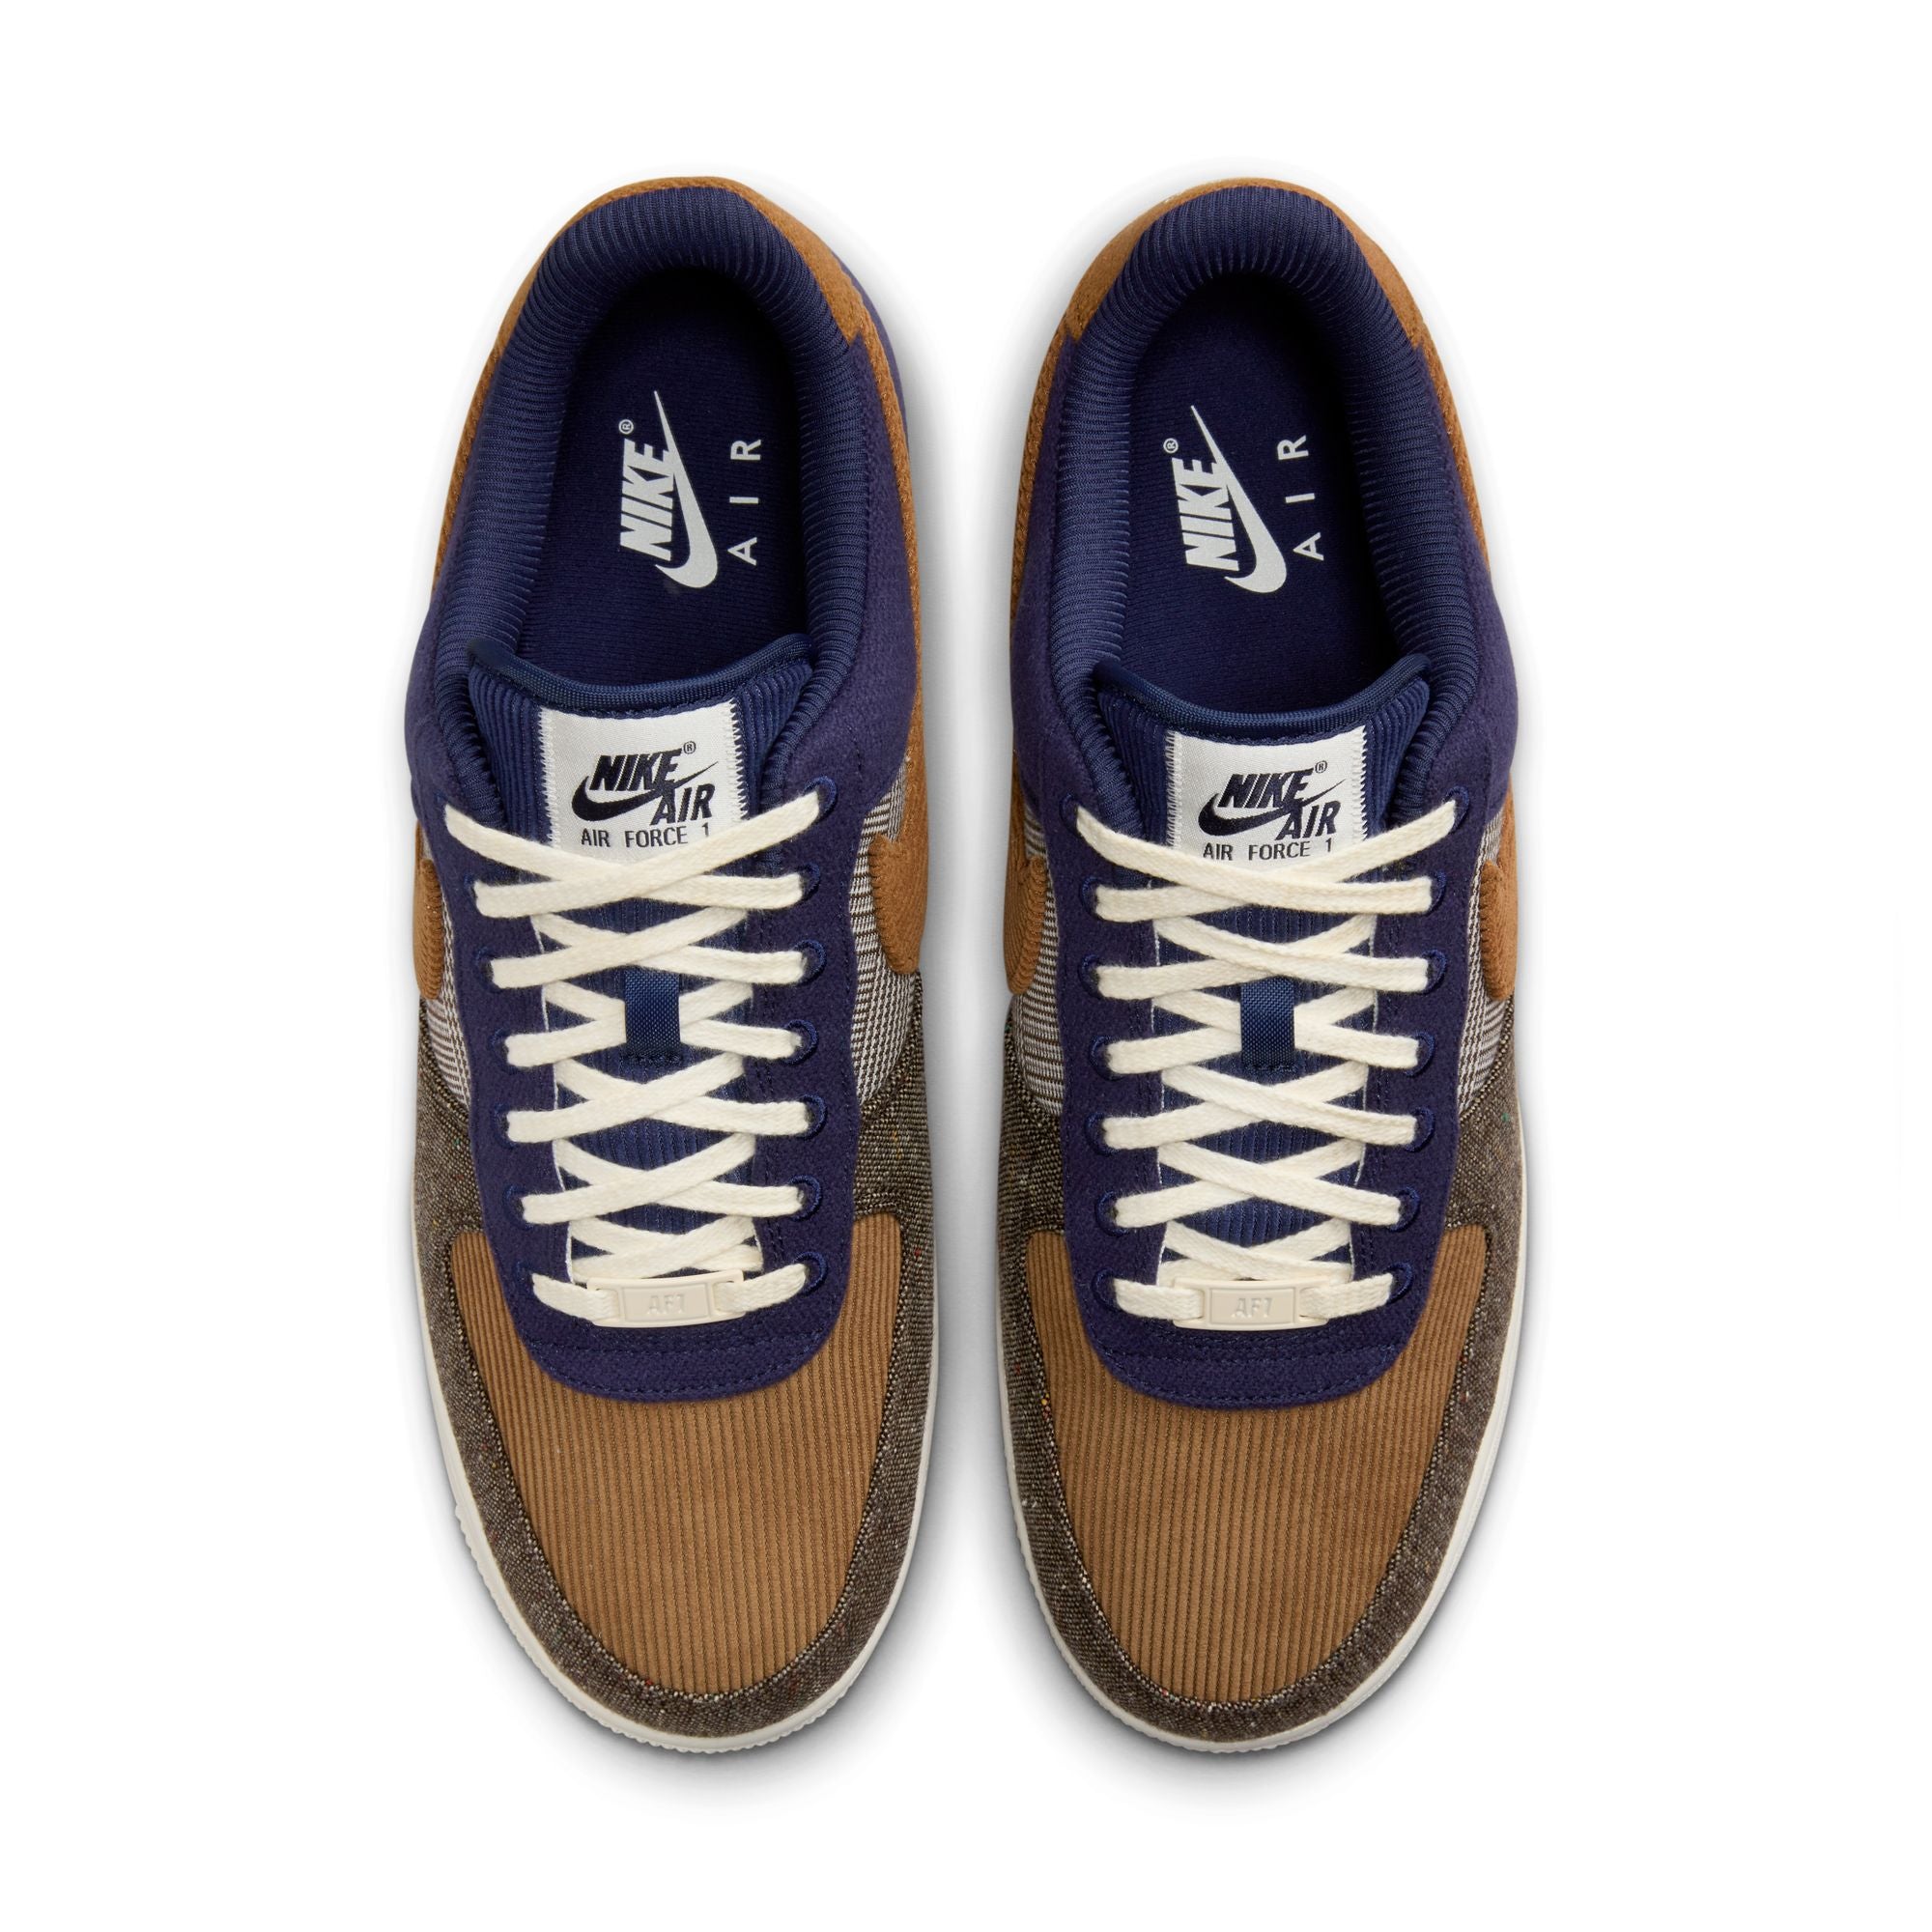 NIKE - Air Force 1 '07 Prm - (Midnight Navy/Ale Brown-Pale I